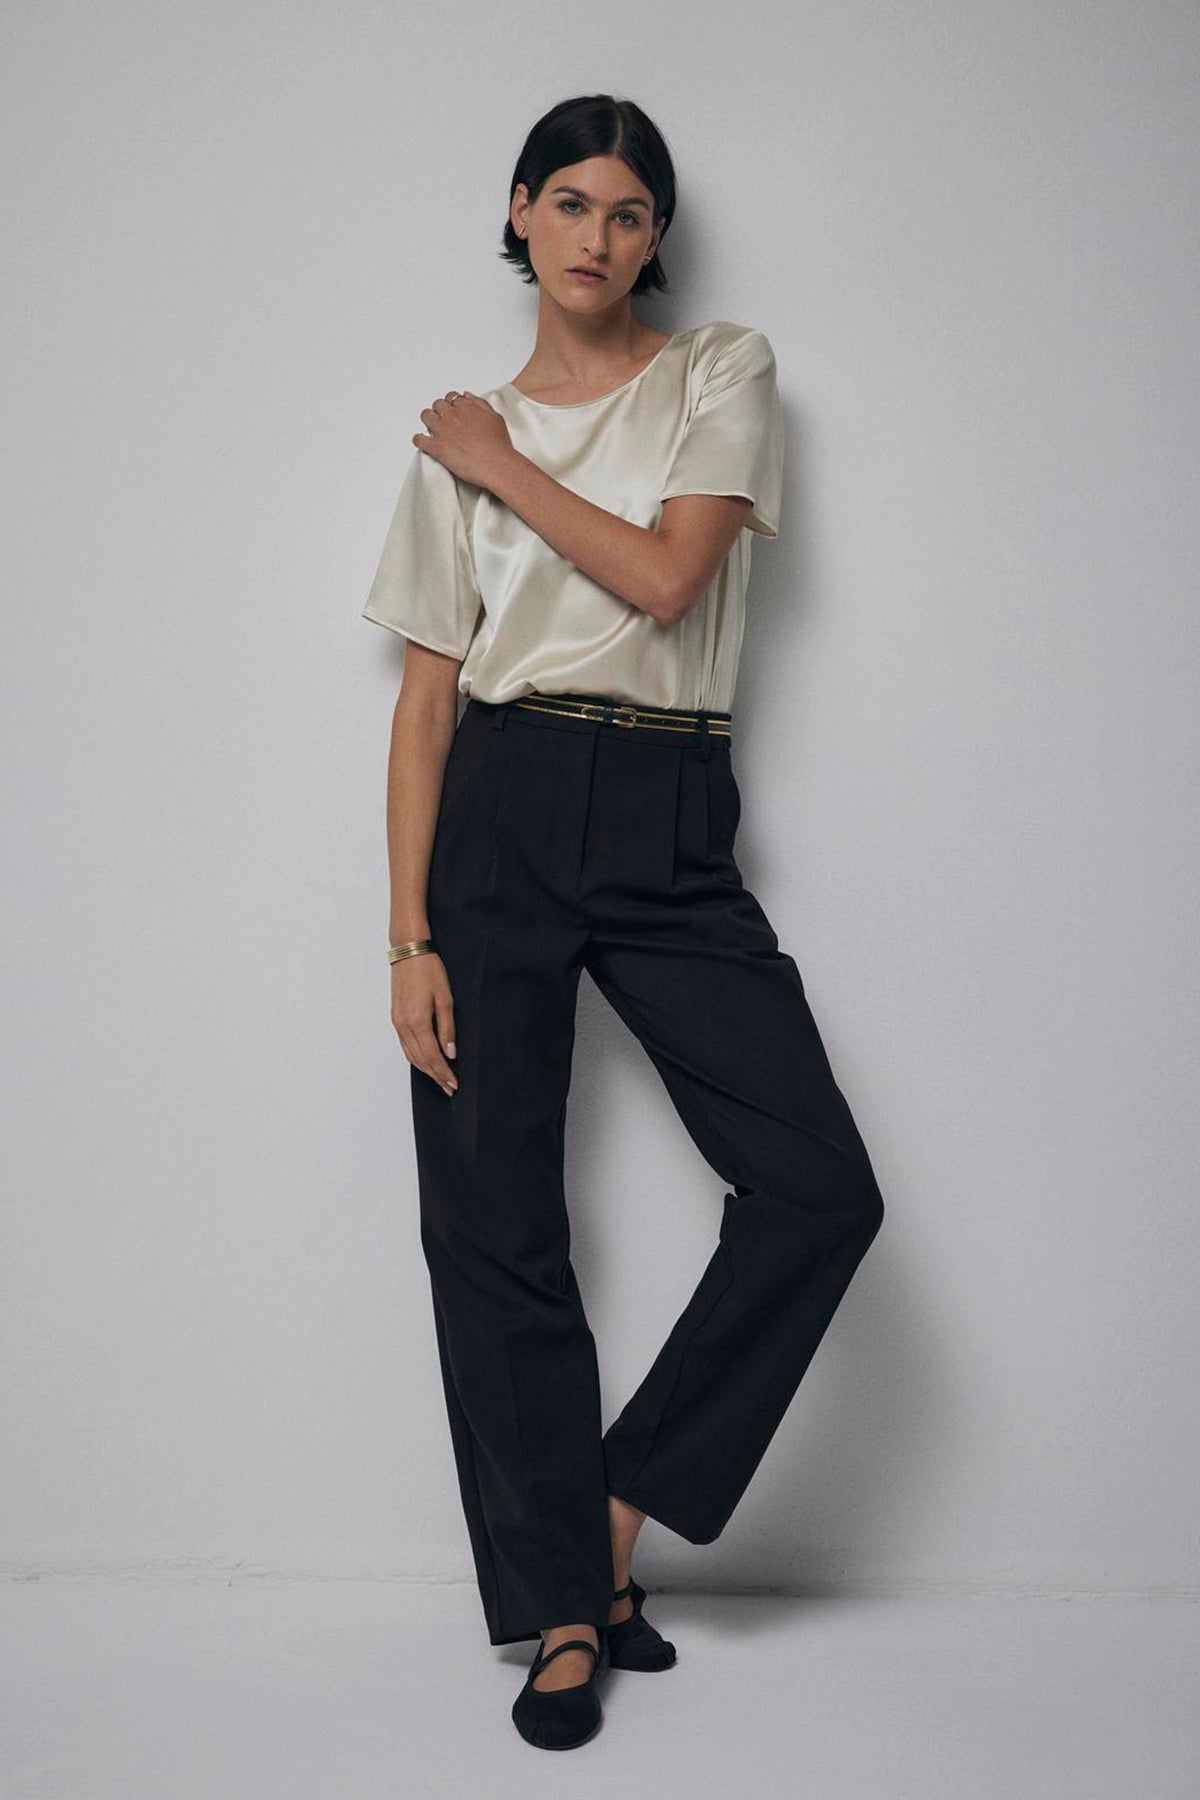   A person standing against a plain background, wearing black trousers, a PASADENA TOP in cream silk charmeuse by Velvet by Jenny Graham, and black flats. 